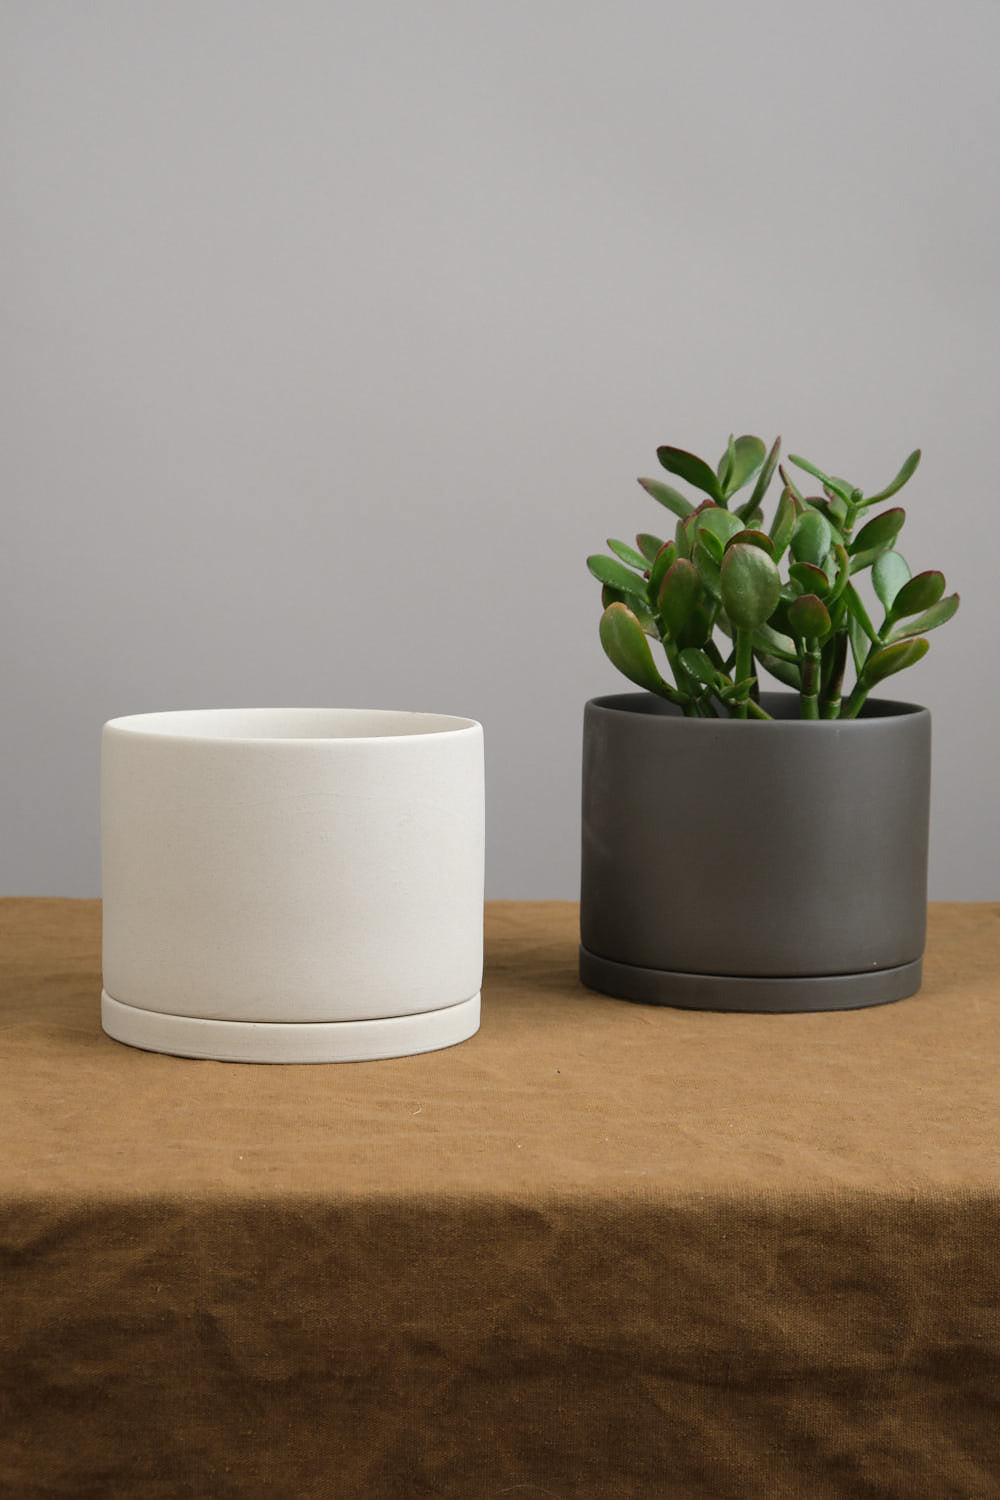 5" Plant Pot in two colors